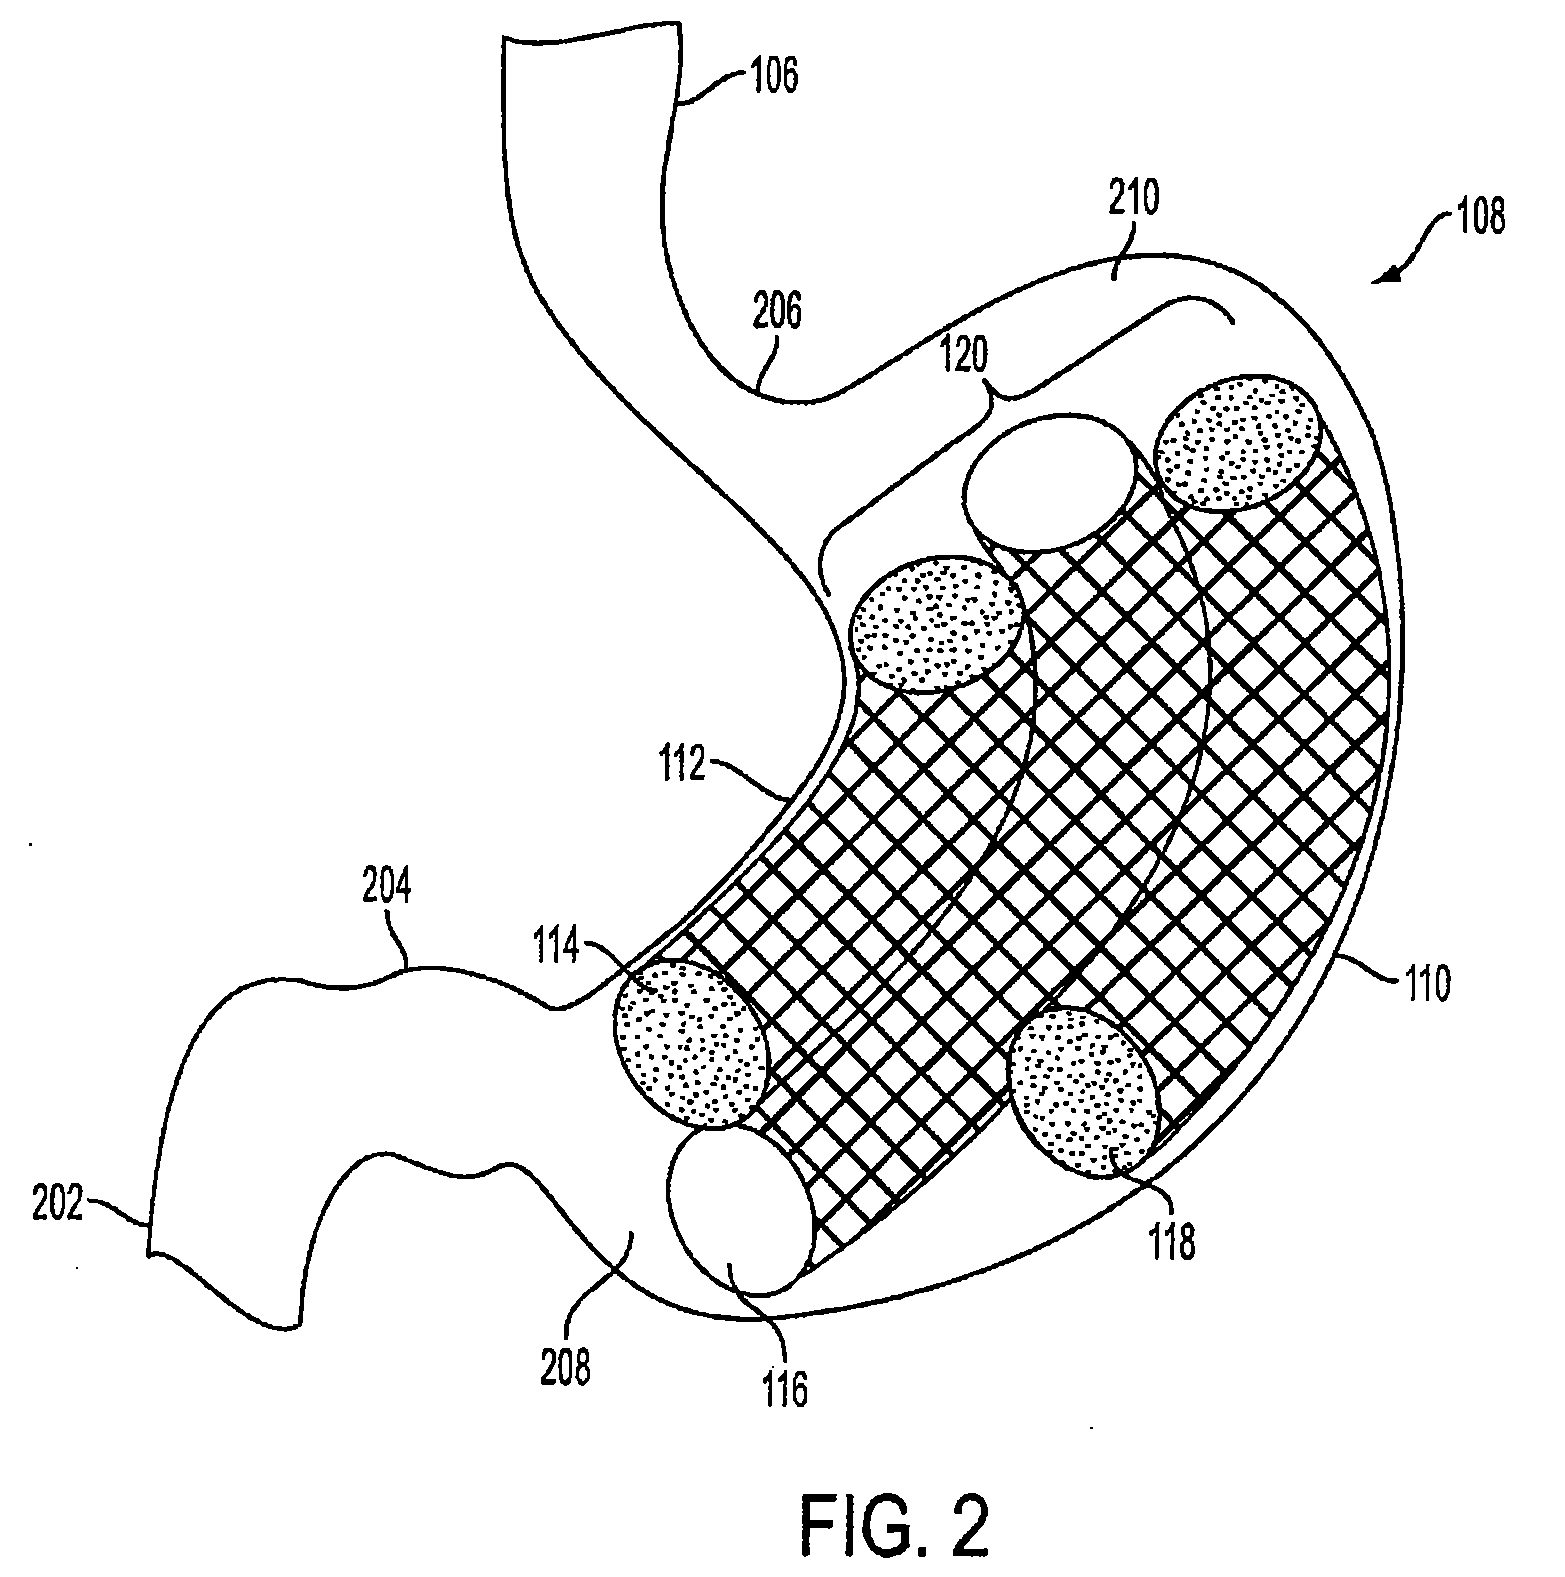 Method and apparatus for treating obesity and controlling weight gain using adjustable intragastric devices